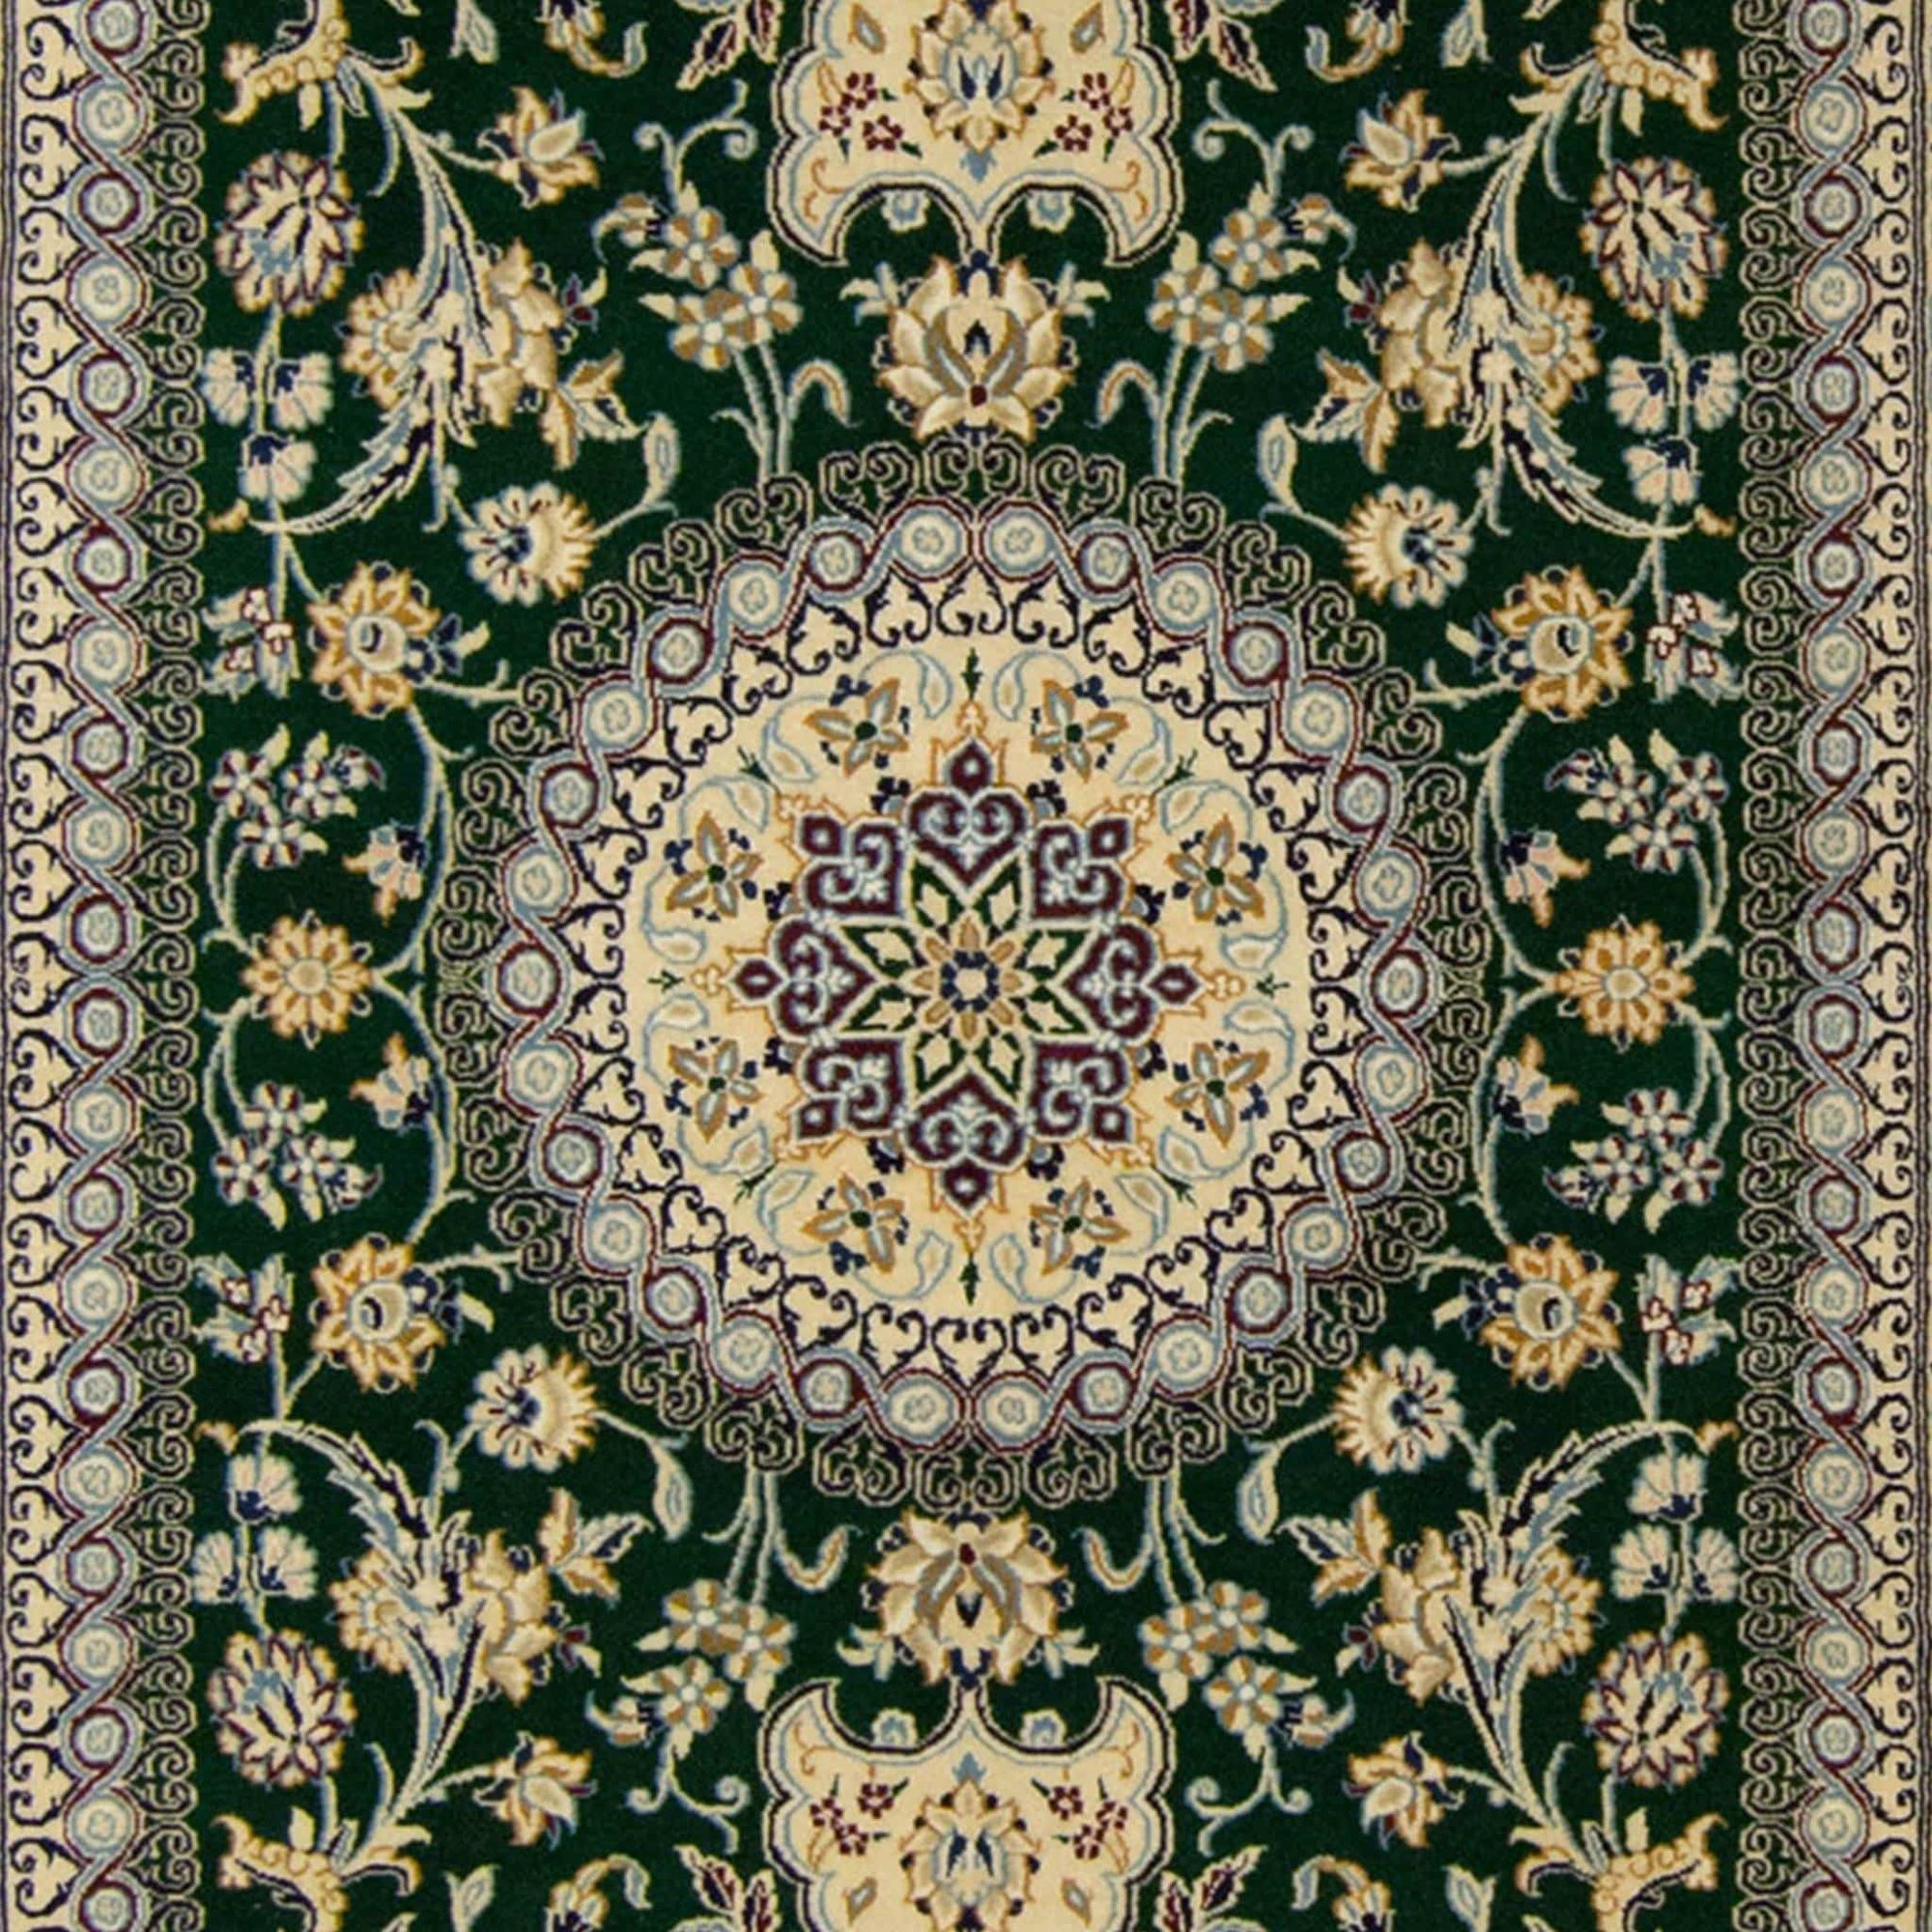 Authentic Fine Persian Hand-knotted Habibian 3LAA Nain Wool & Silk Rug ( SIGNED HABIBIAN ) 125cm x 190cm